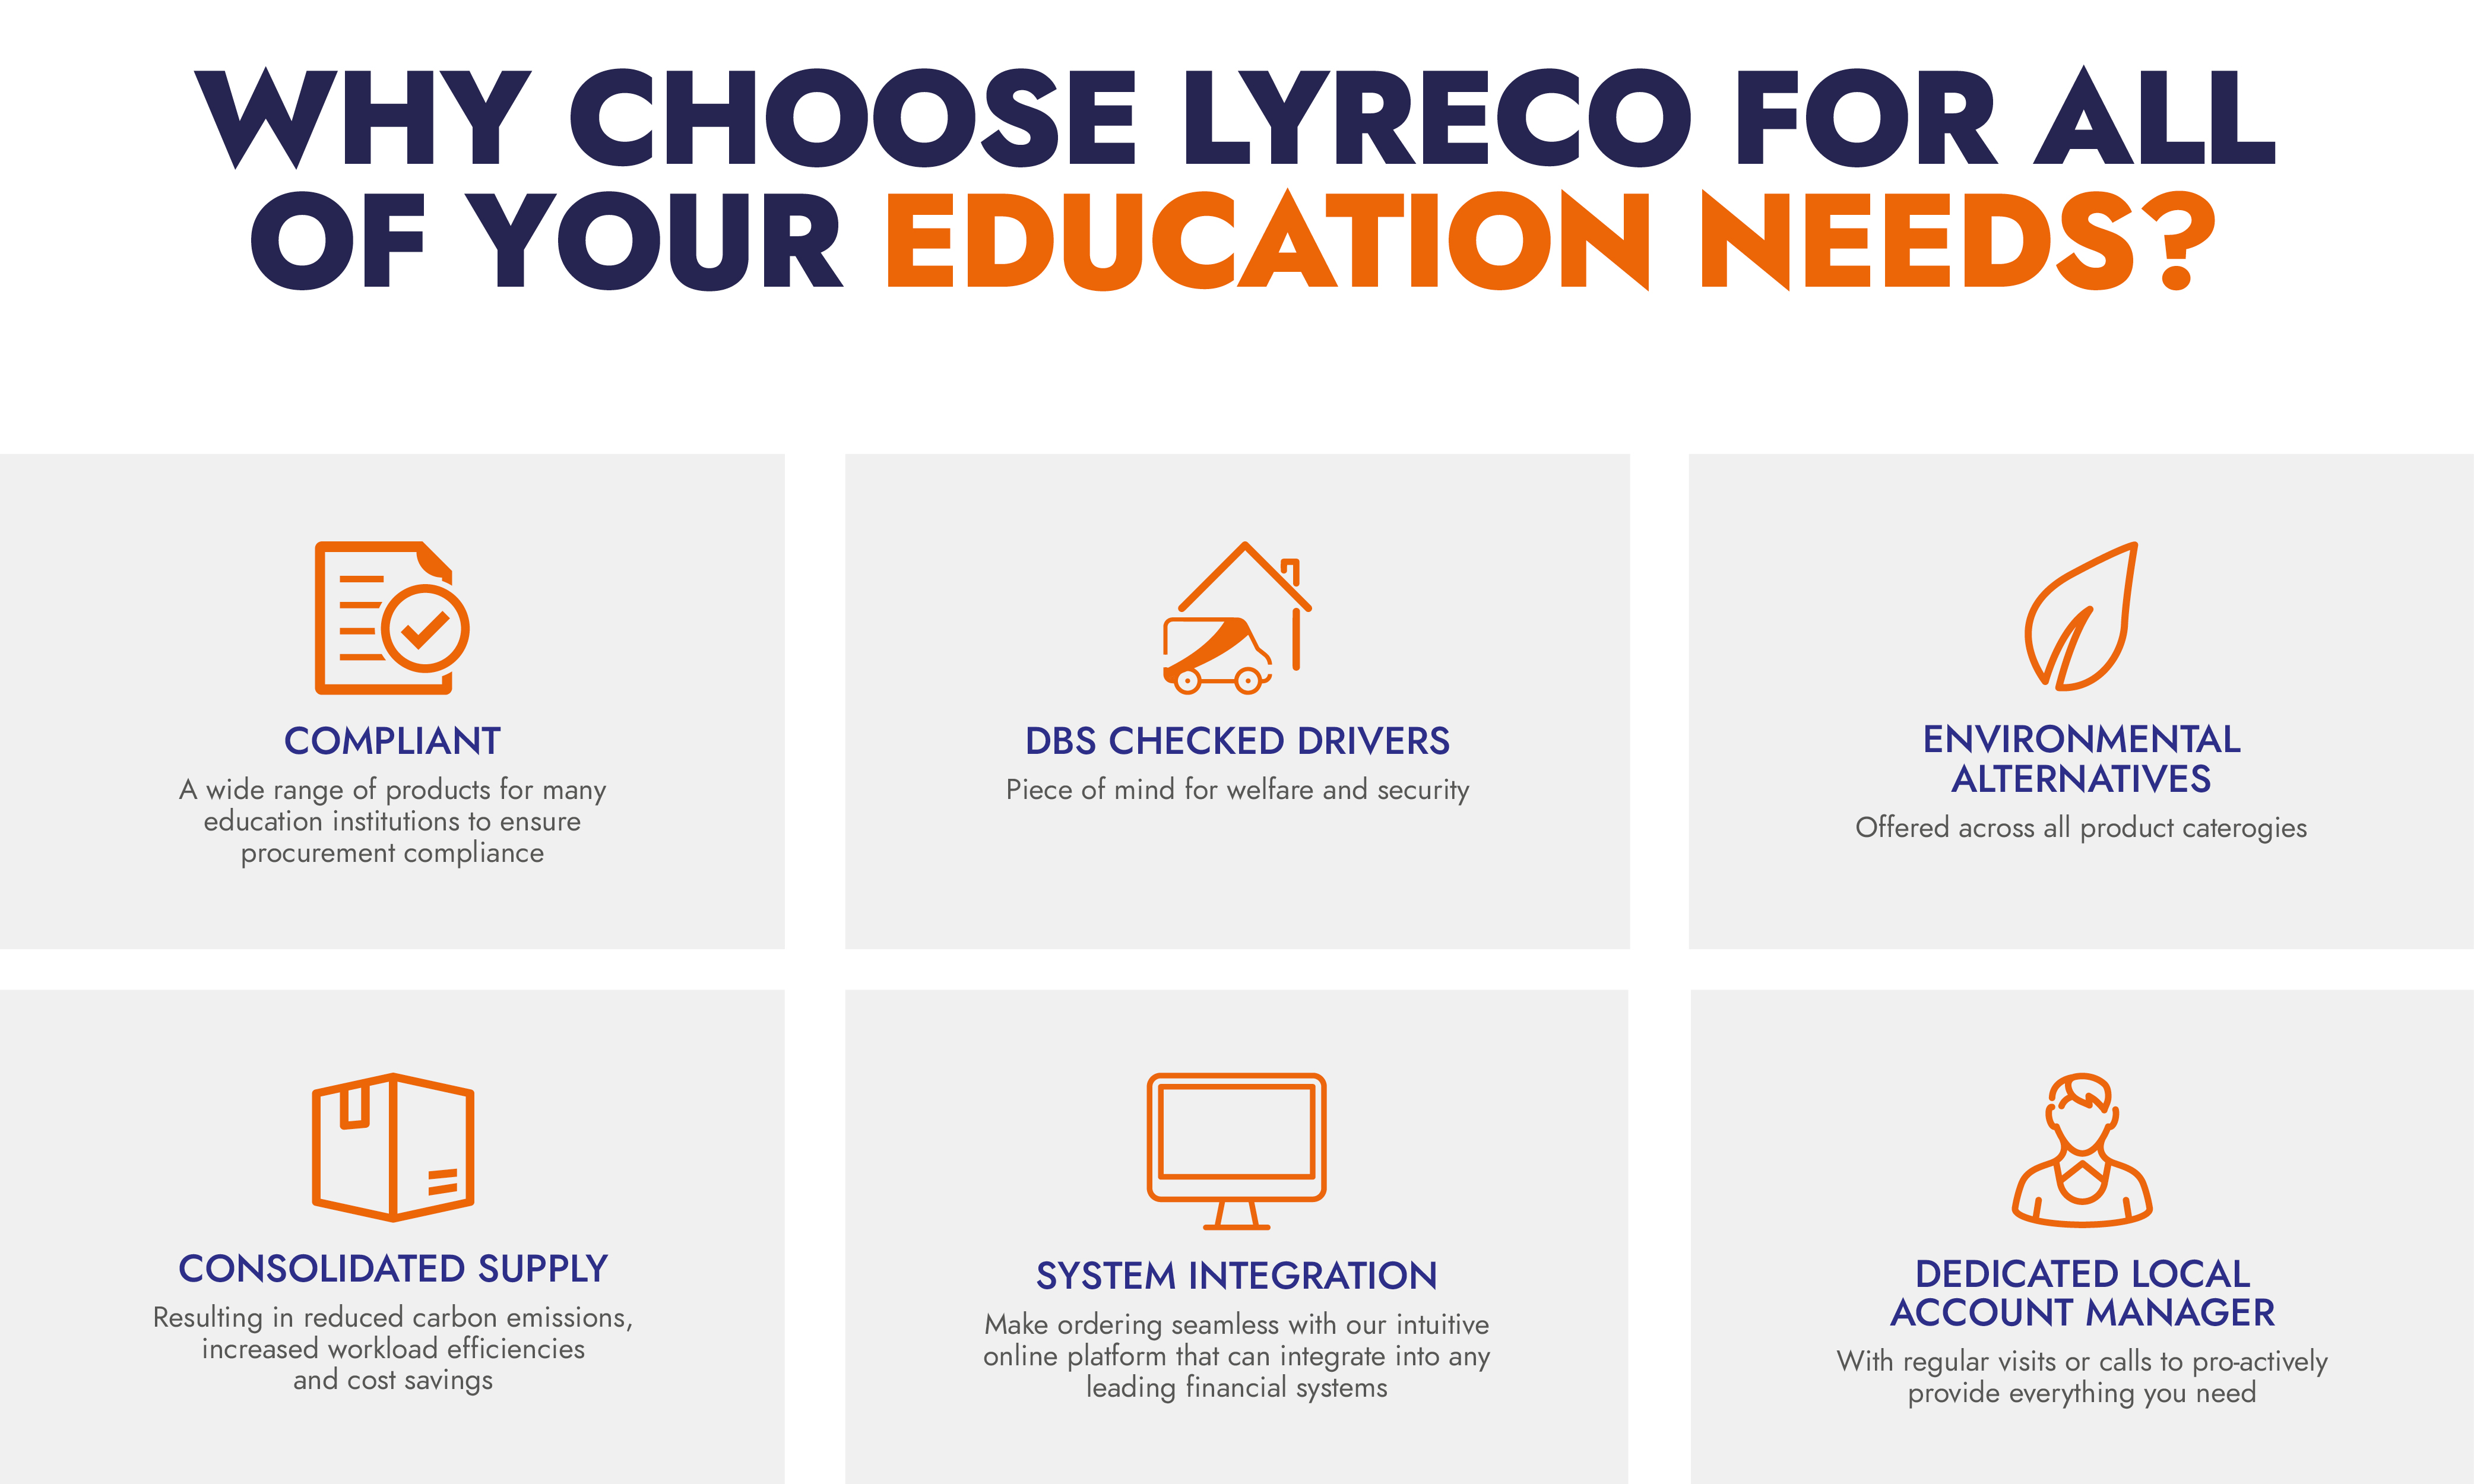 Why choose Lyreco for all of your education needs?